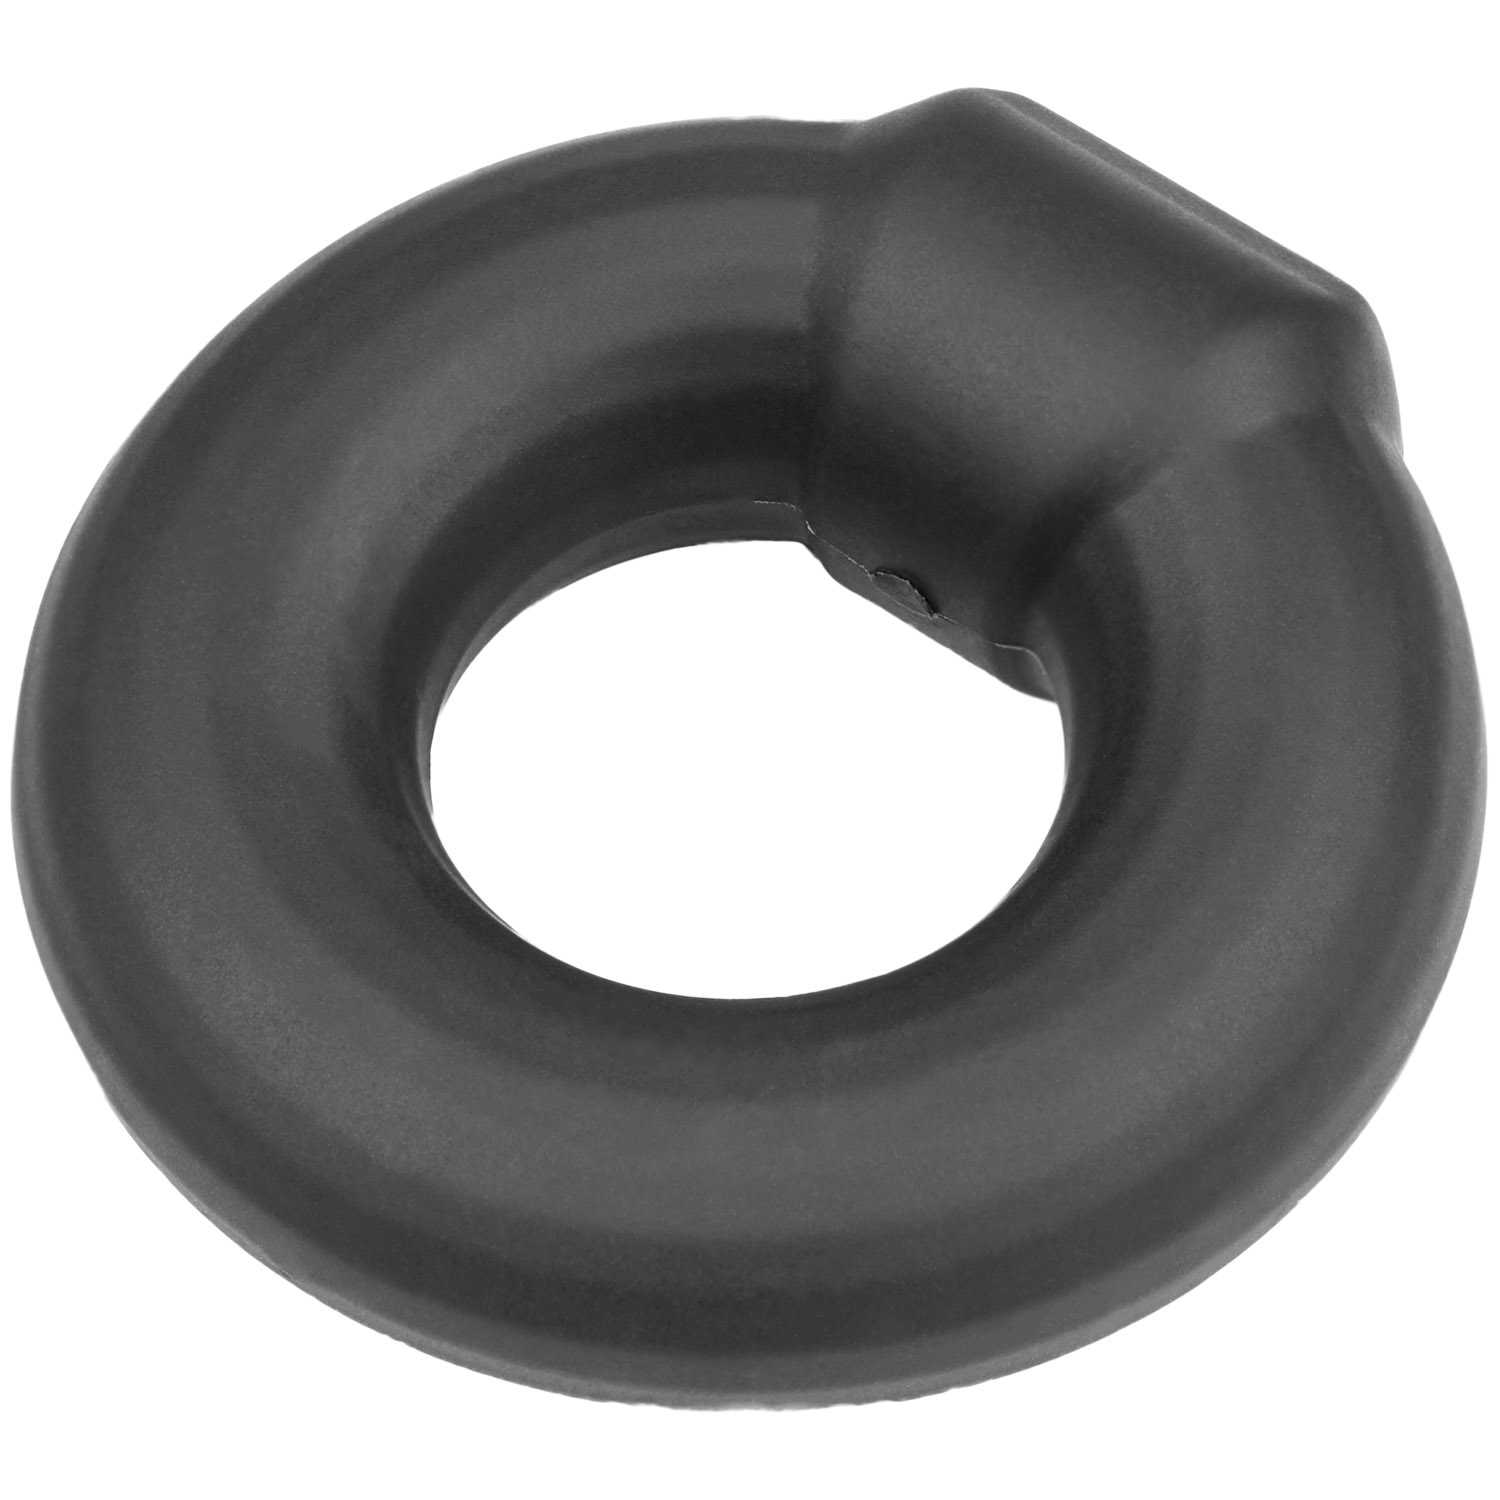 Sinful Pro Stretchy Silicone Penisring - Black